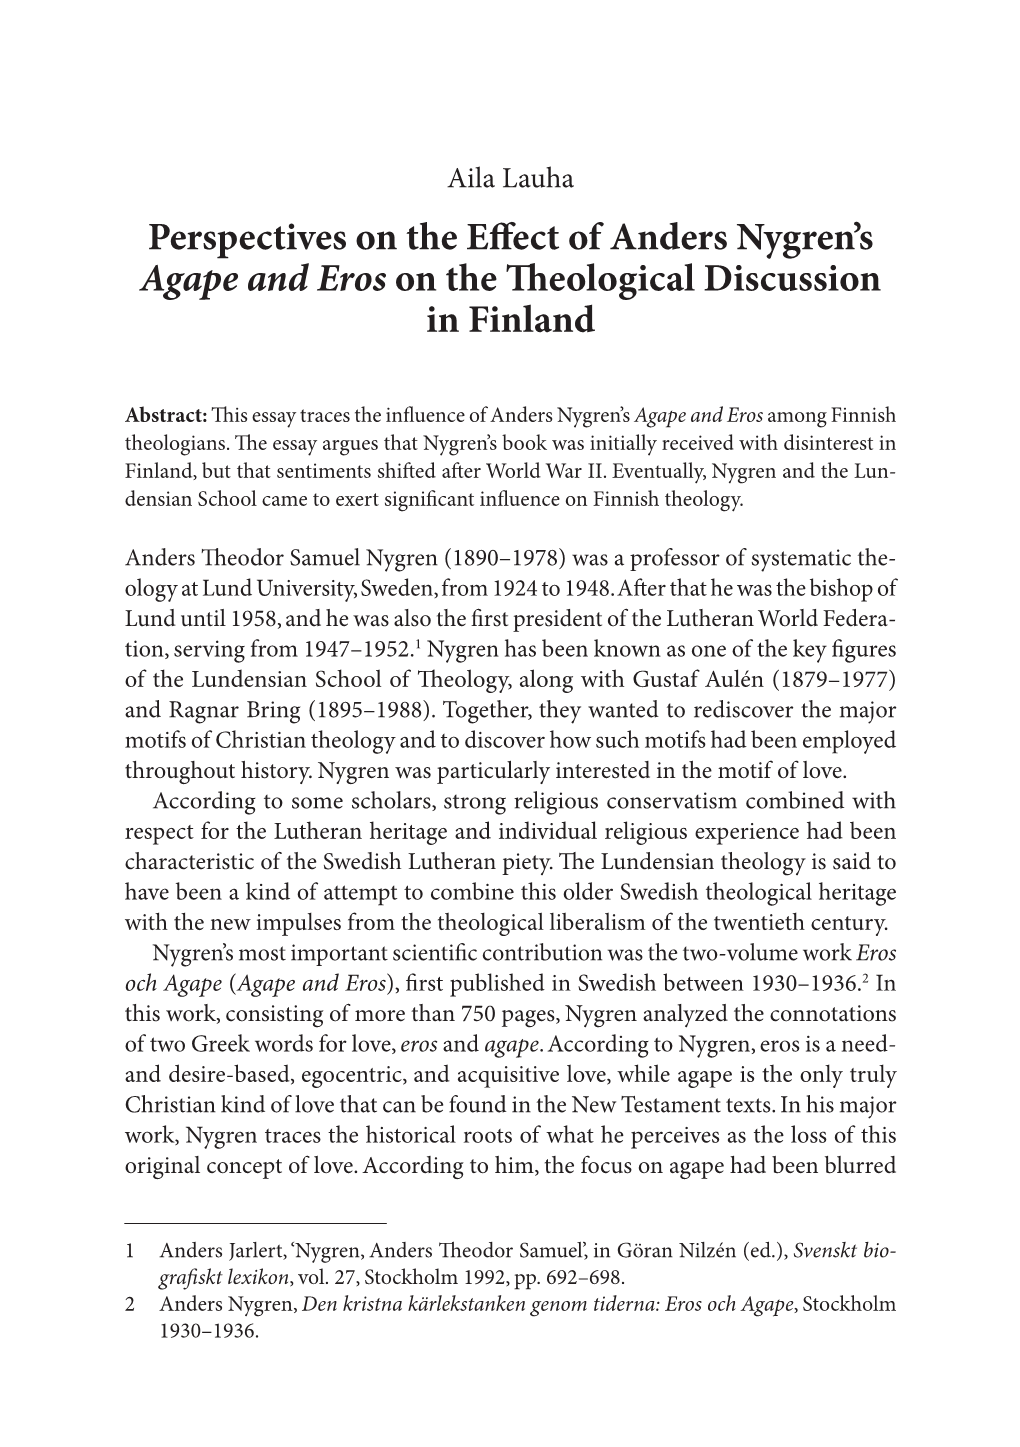 Perspectives on the Effect of Anders Nygren's Agape and Eros on the Theological Discussion in Finland